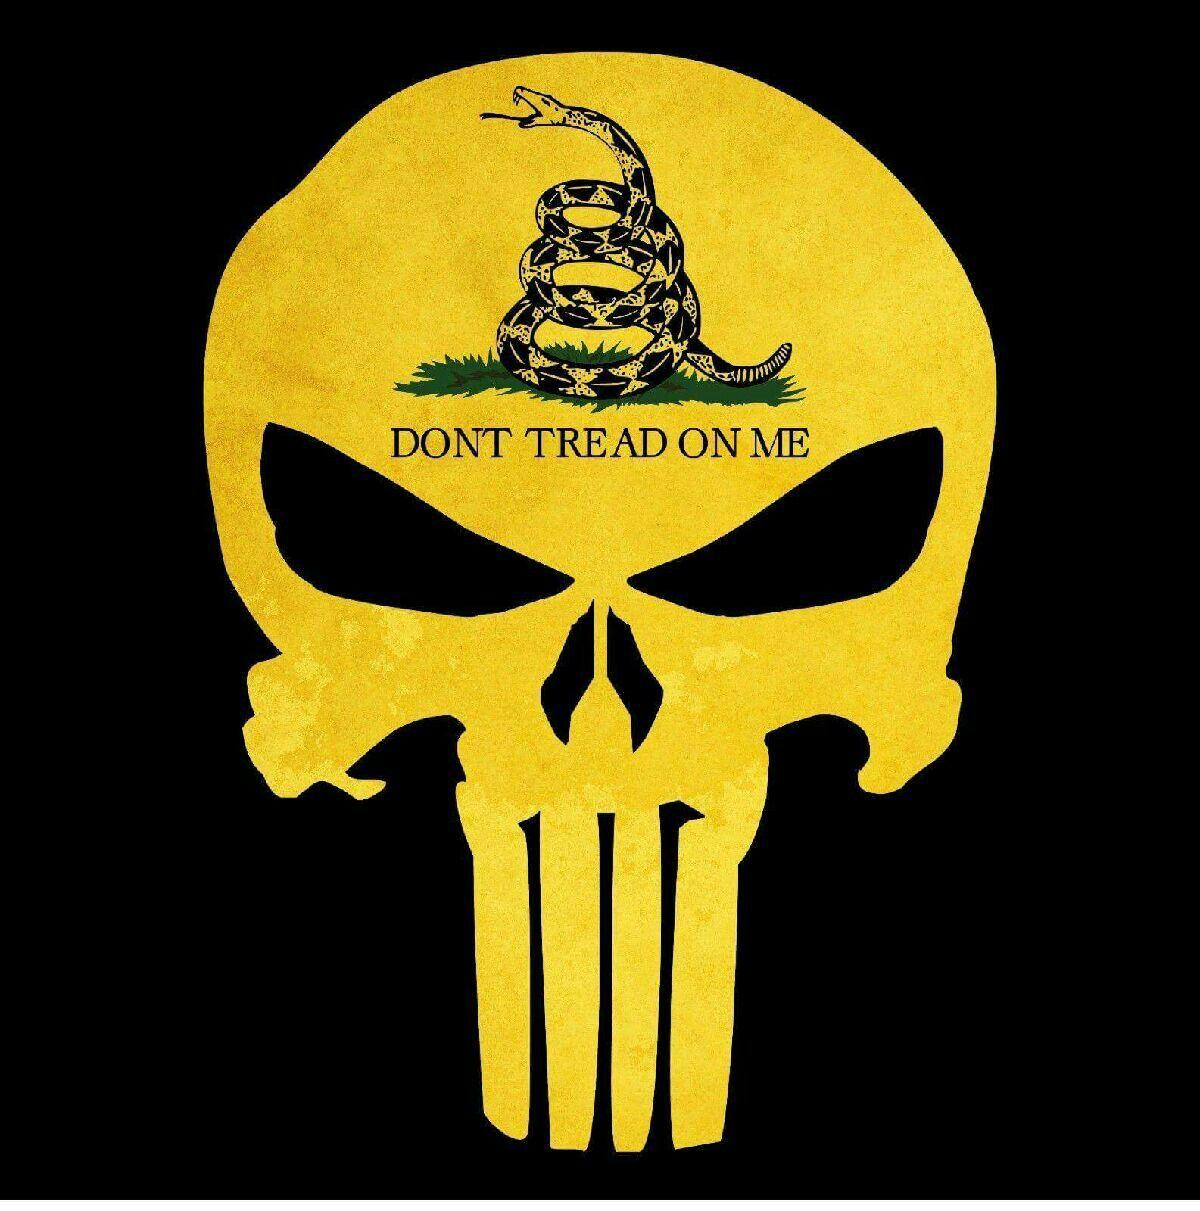 Don't tread on me!!!. Dont tread on me, Gadsden flag, Punisher